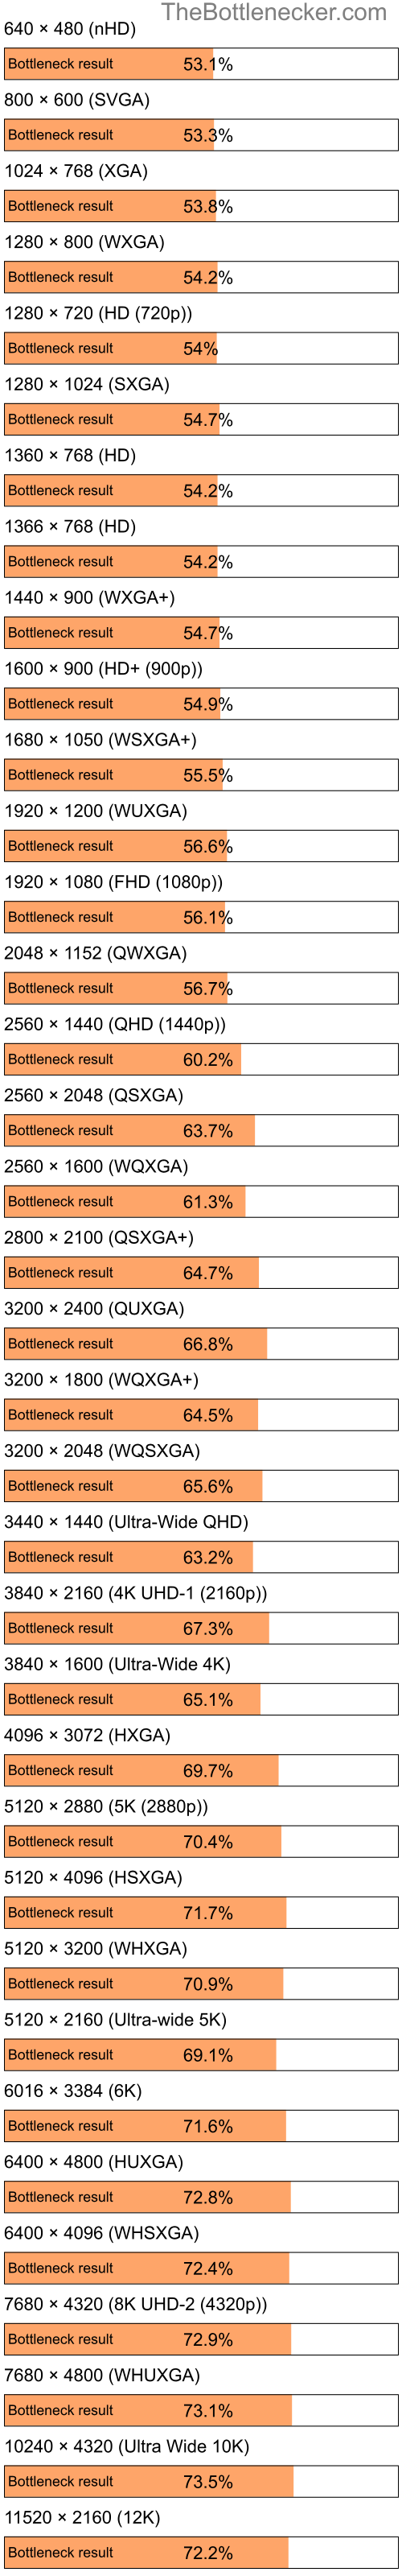 Bottleneck results by resolution for Intel Atom N270 and AMD Mobility Radeon HD 2400 XT in Processor Intense Tasks